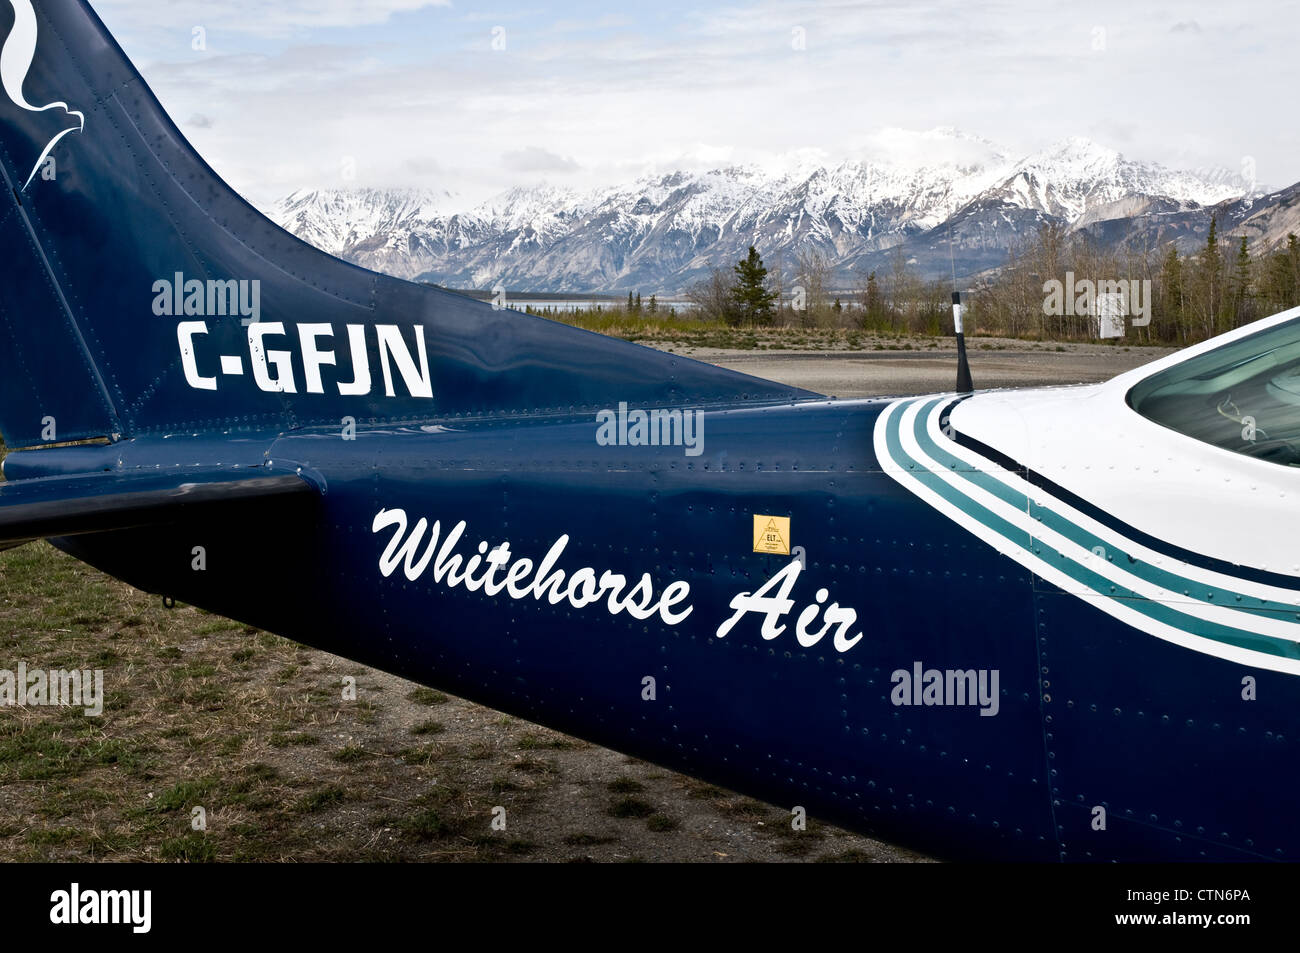 The tail section of a Cessna 207A at Haines Junction airport near the St. Elias Mountains and Kluane National Park, Yukon Territory, Canada. Stock Photo